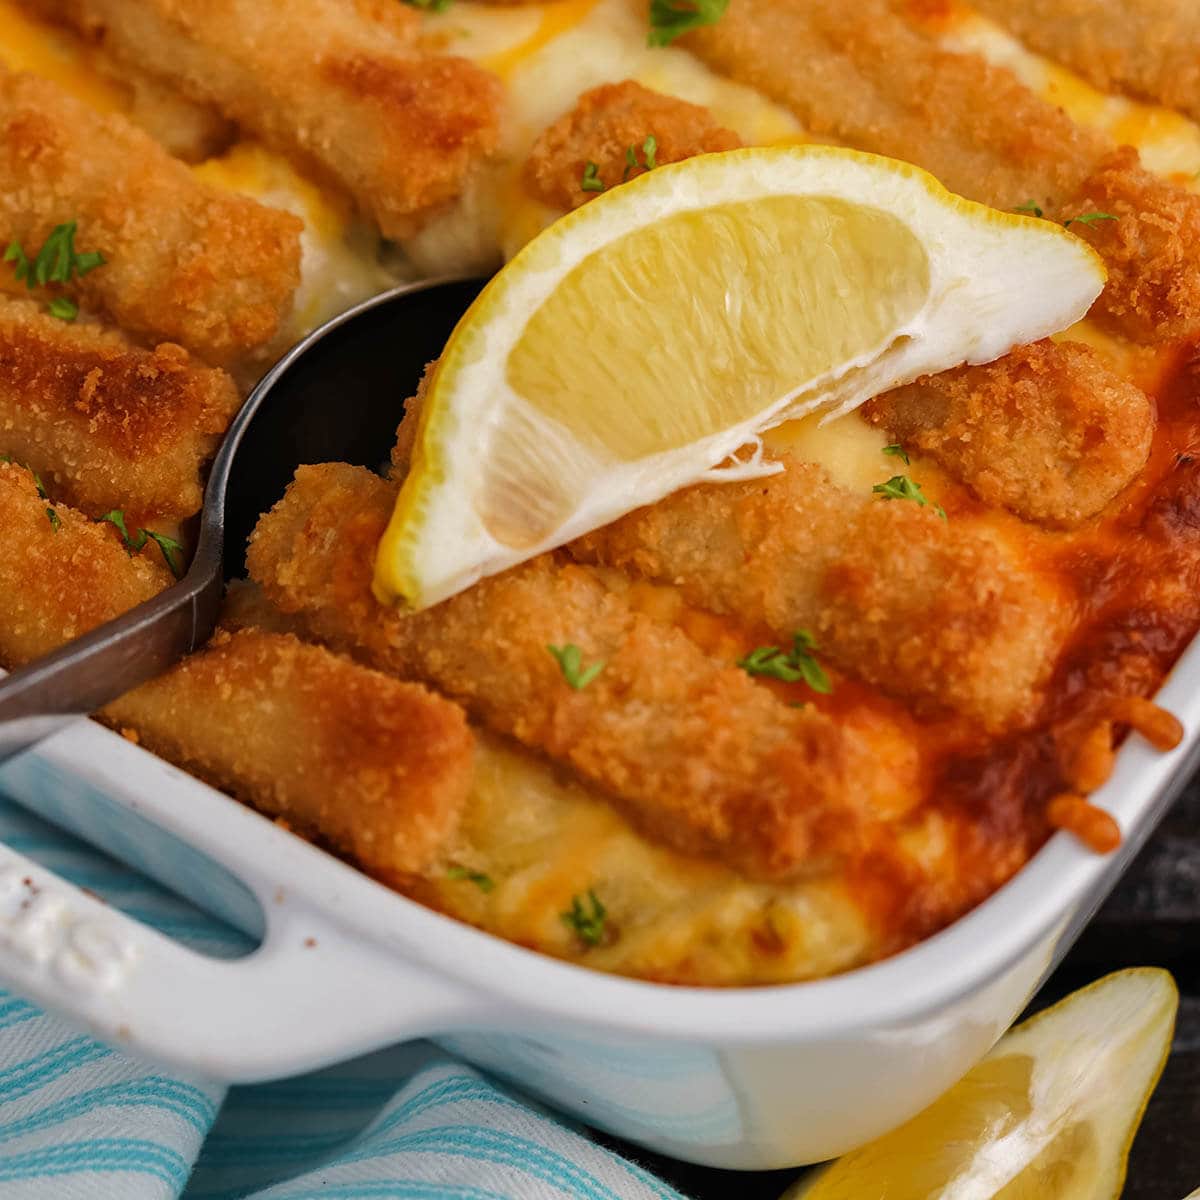 Fishstick casserole in baking dish with serving spoon.